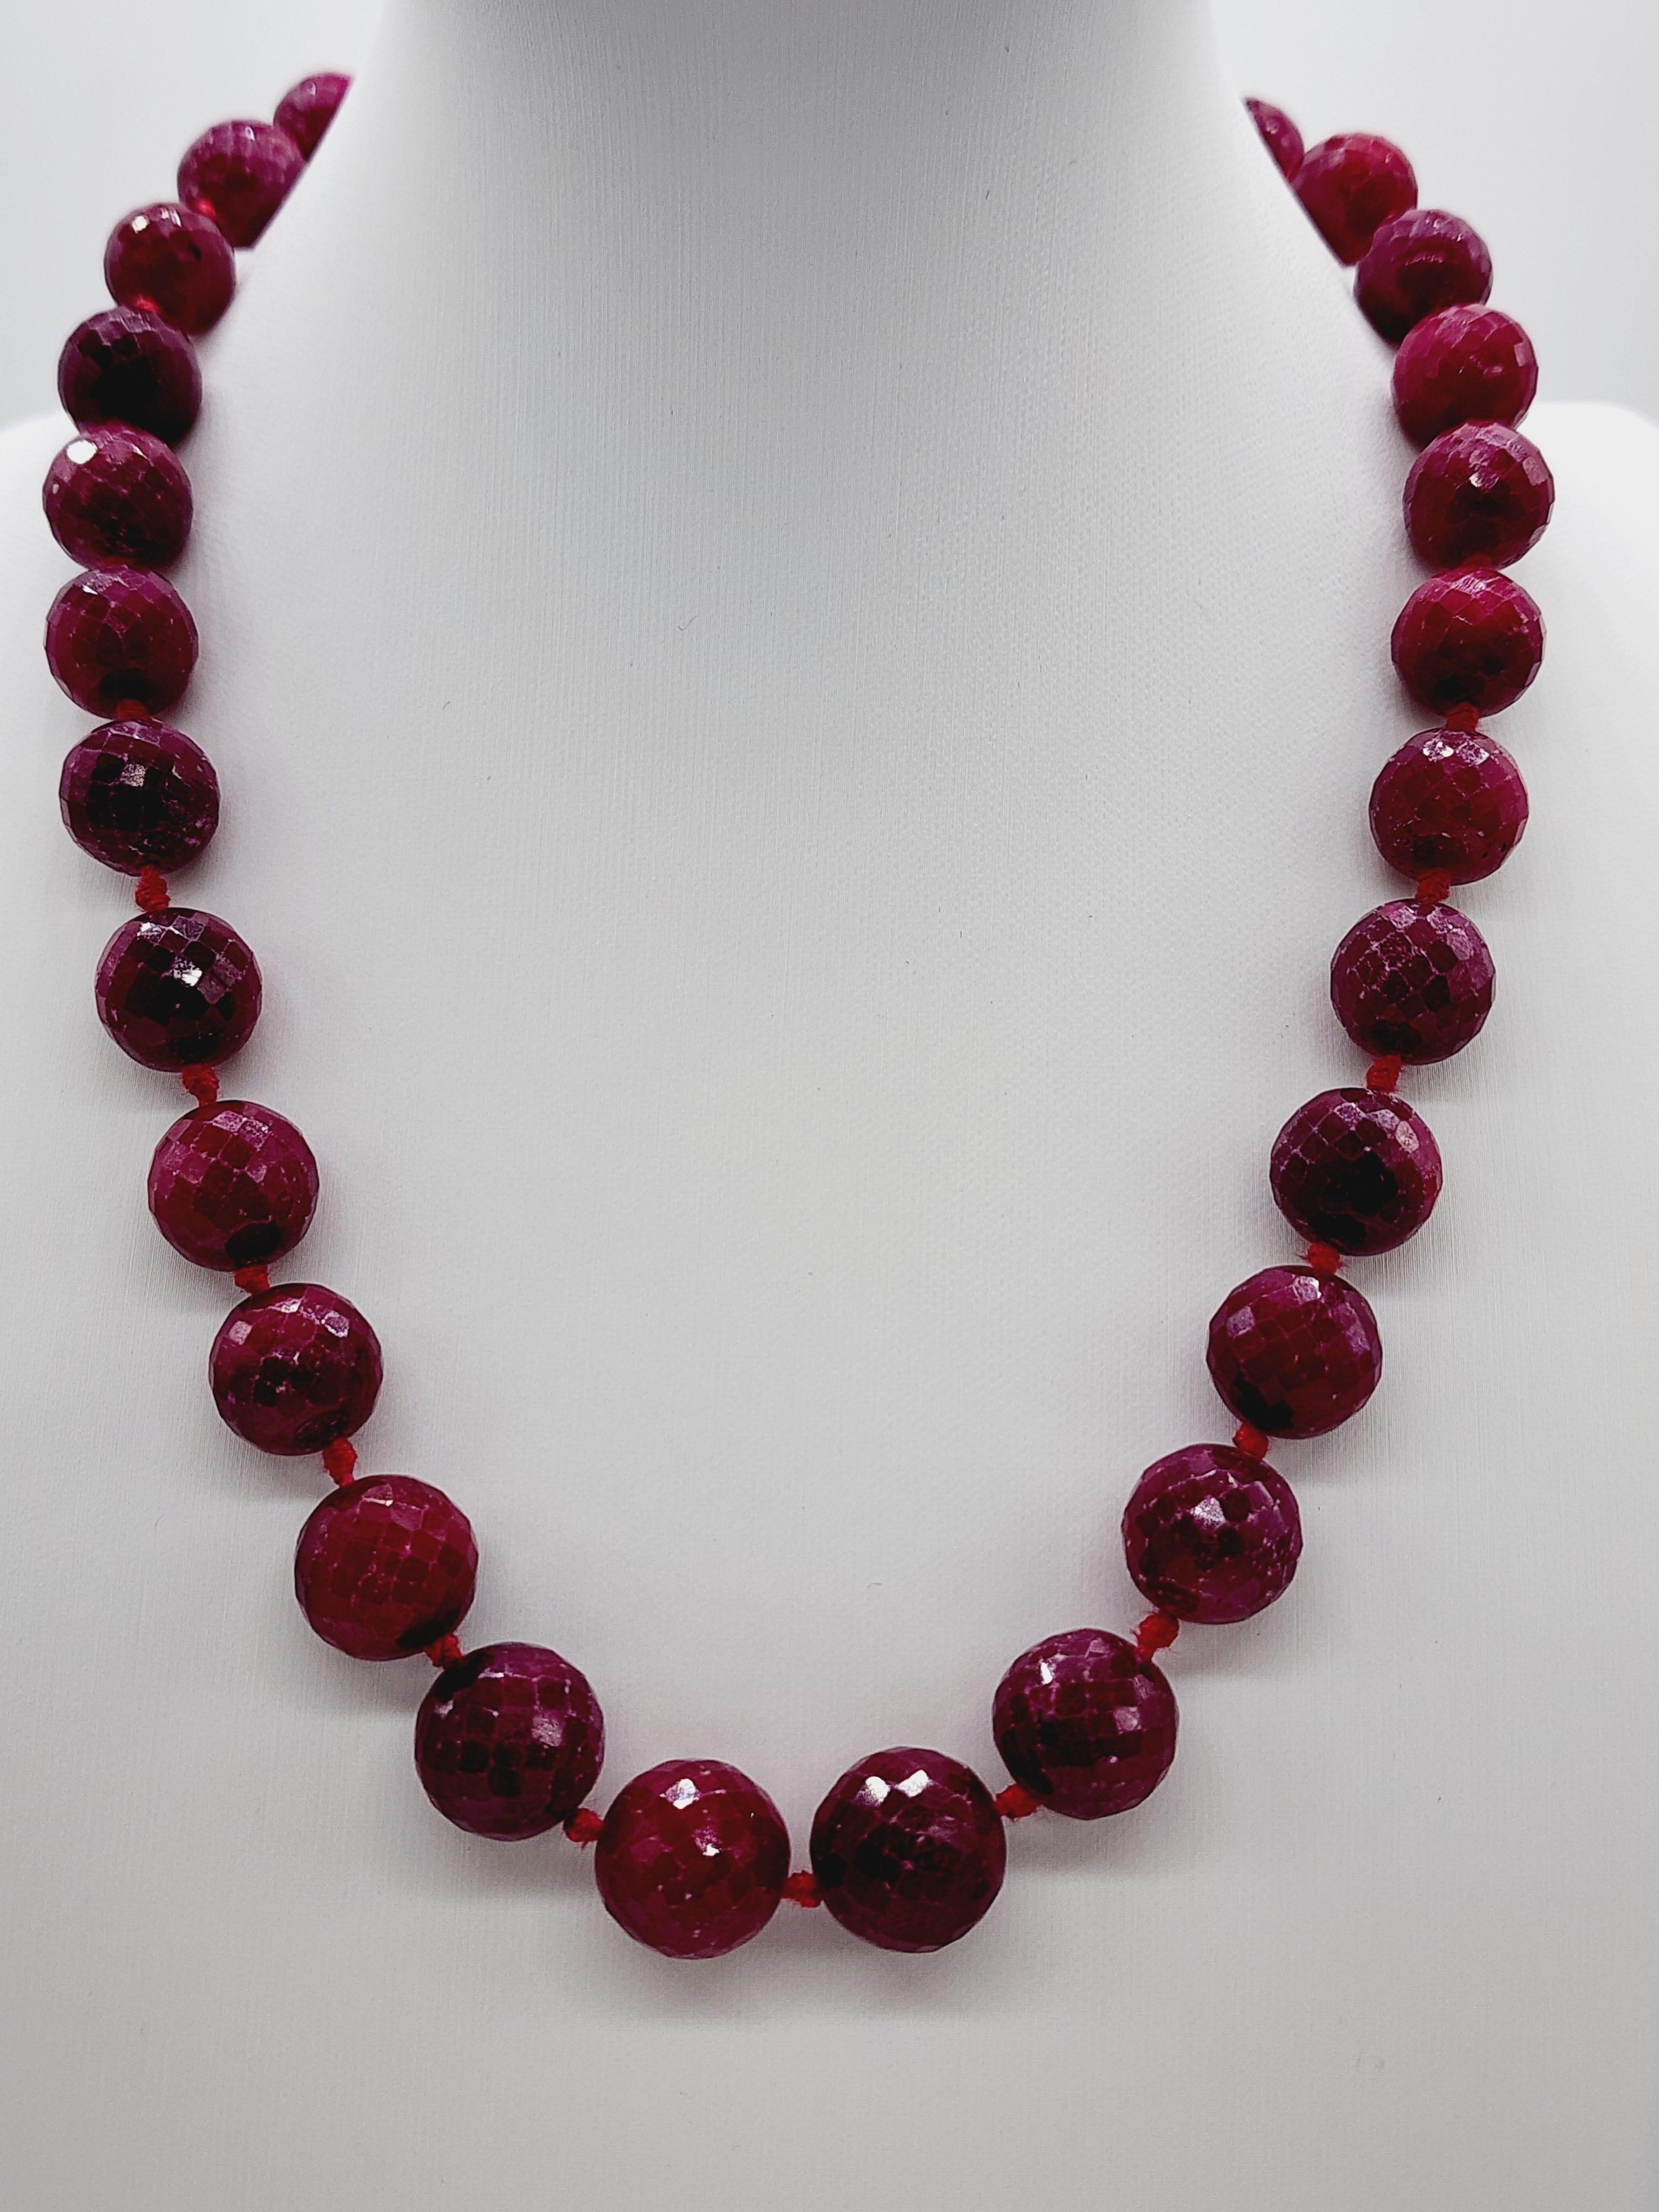 483.60 CARATS RUBY BEADED NECKLACE YELLOW GOLD 14 KARAT.
17 inch. 